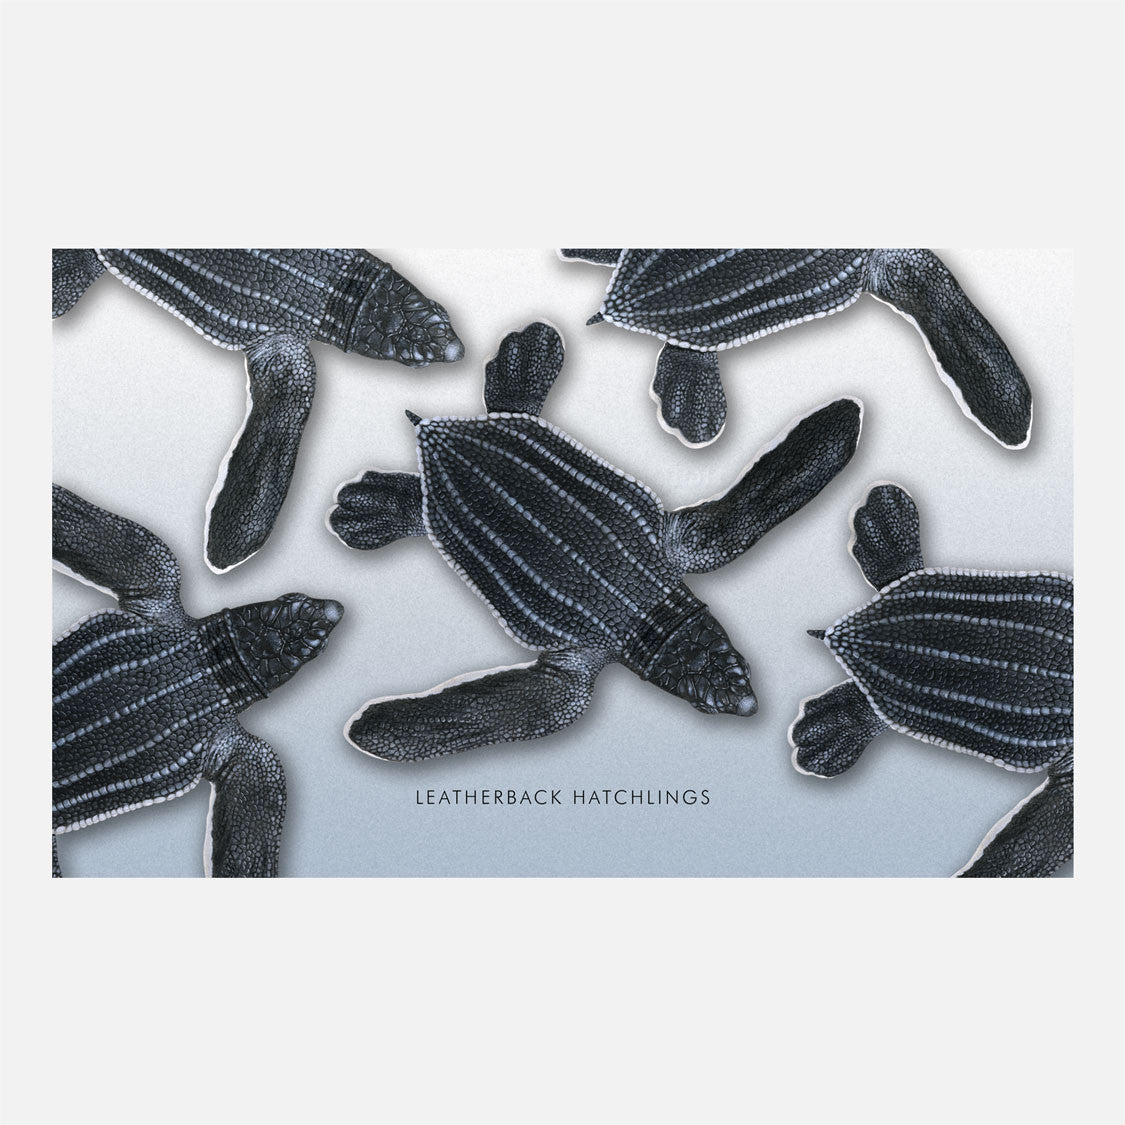 This design is an illustration of leatherback sea turtle hatchlings, Dermochelys coriacea. 